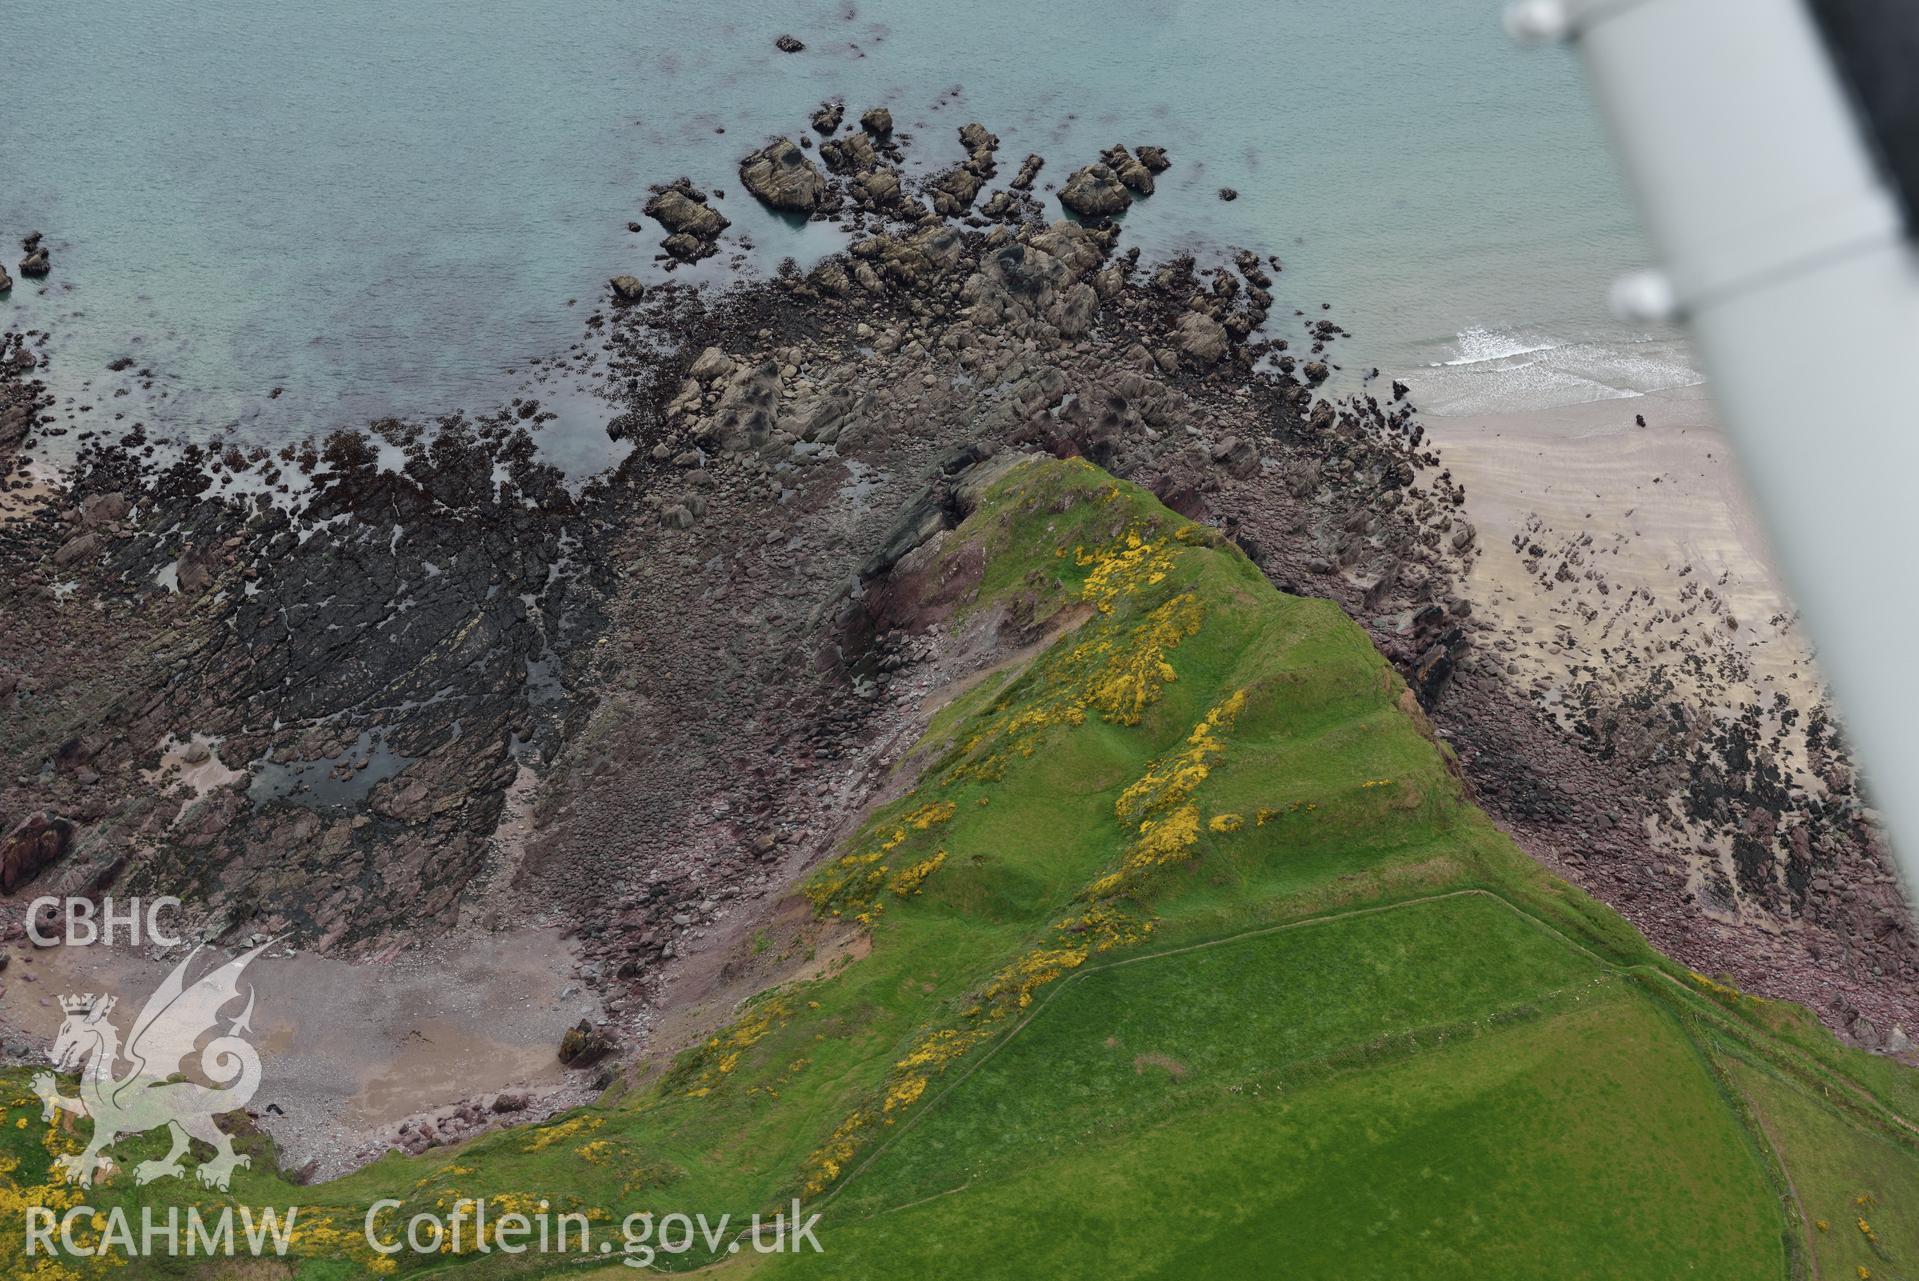 Great Castle Head, Dale. Baseline aerial reconnaissance survey for the CHERISH Project. ? Crown: CHERISH PROJECT 2017. Produced with EU funds through the Ireland Wales Co-operation Programme 2014-2020. All material made freely available through the Open Government Licence.